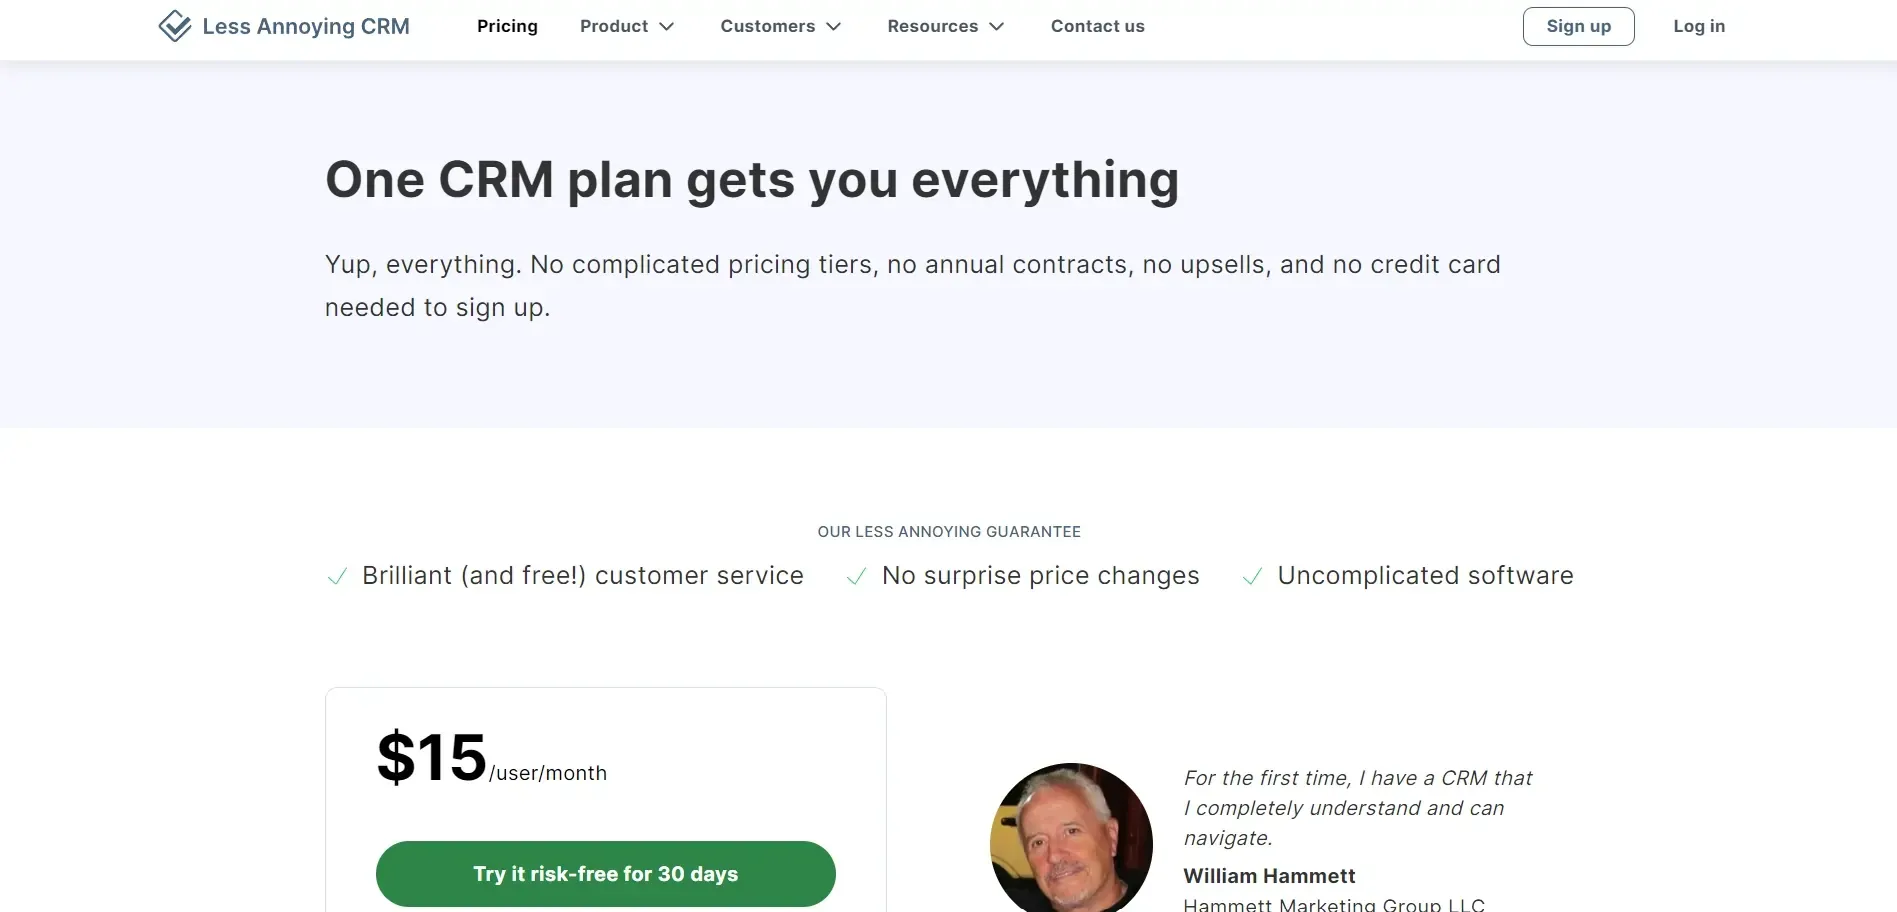 Less Annoying CRM Pricing